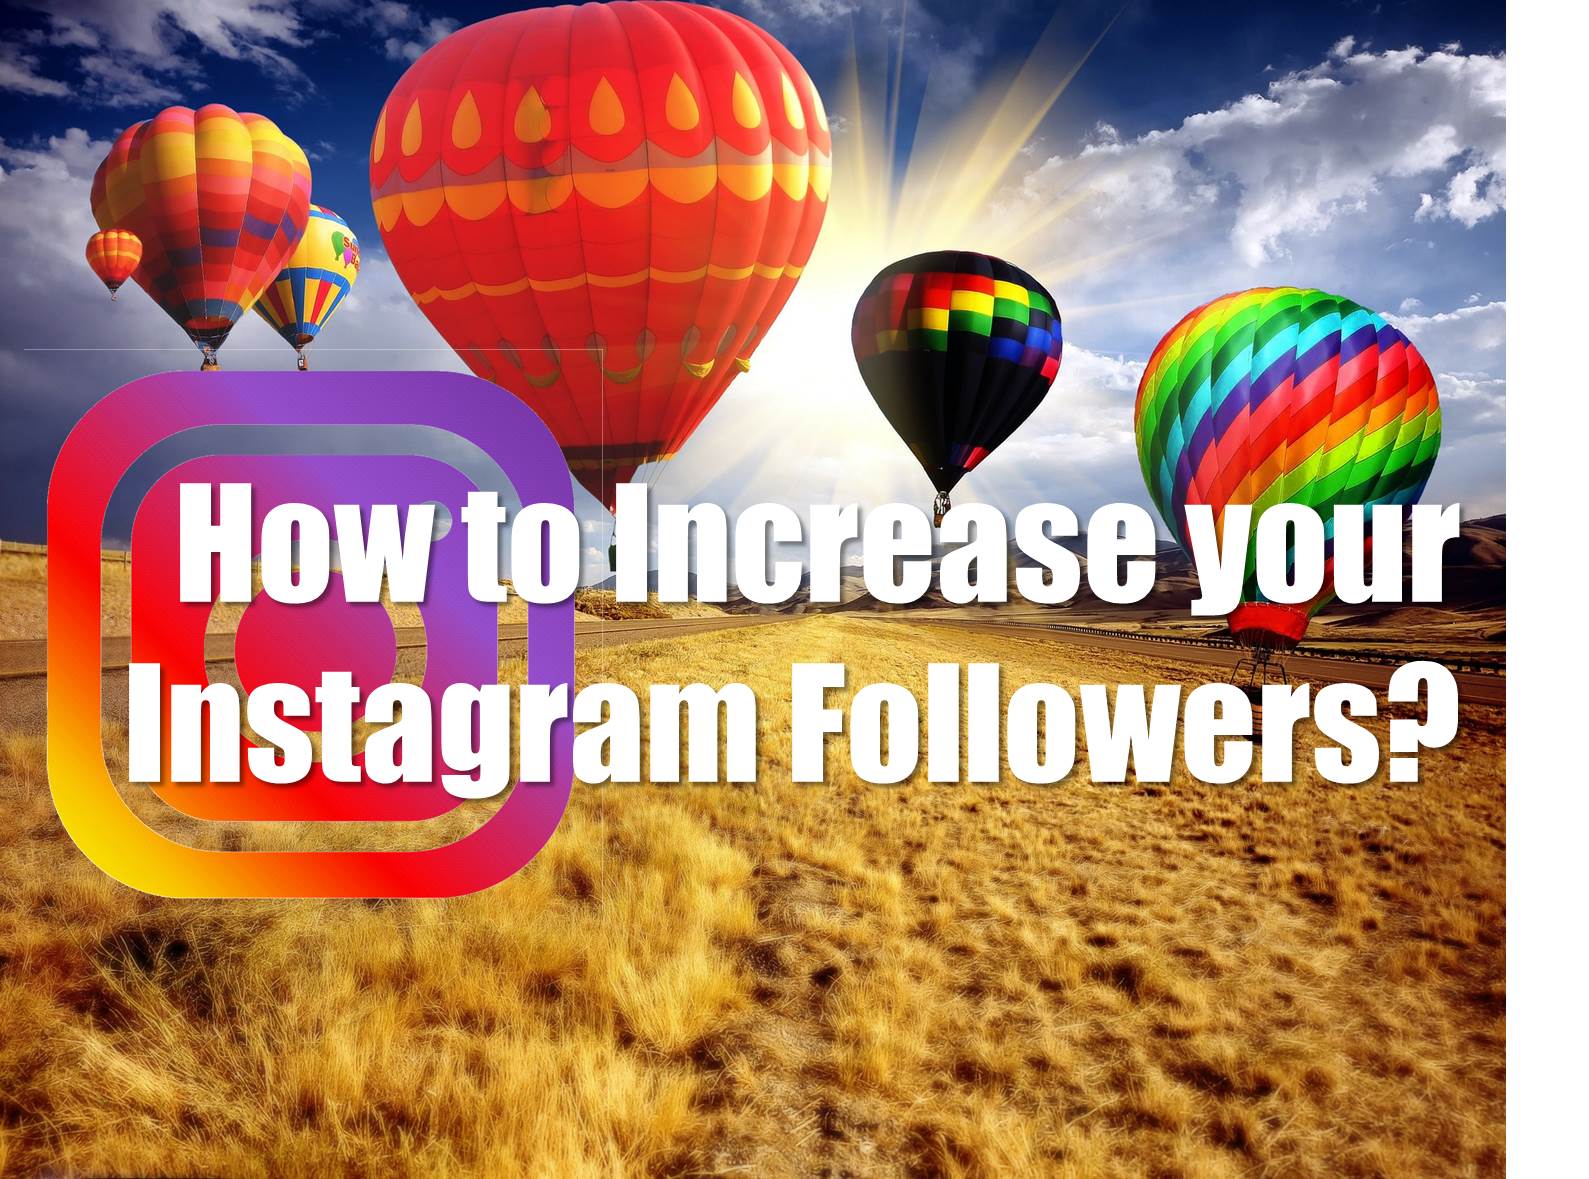 Instagram likes are a time-saver for those who need them.